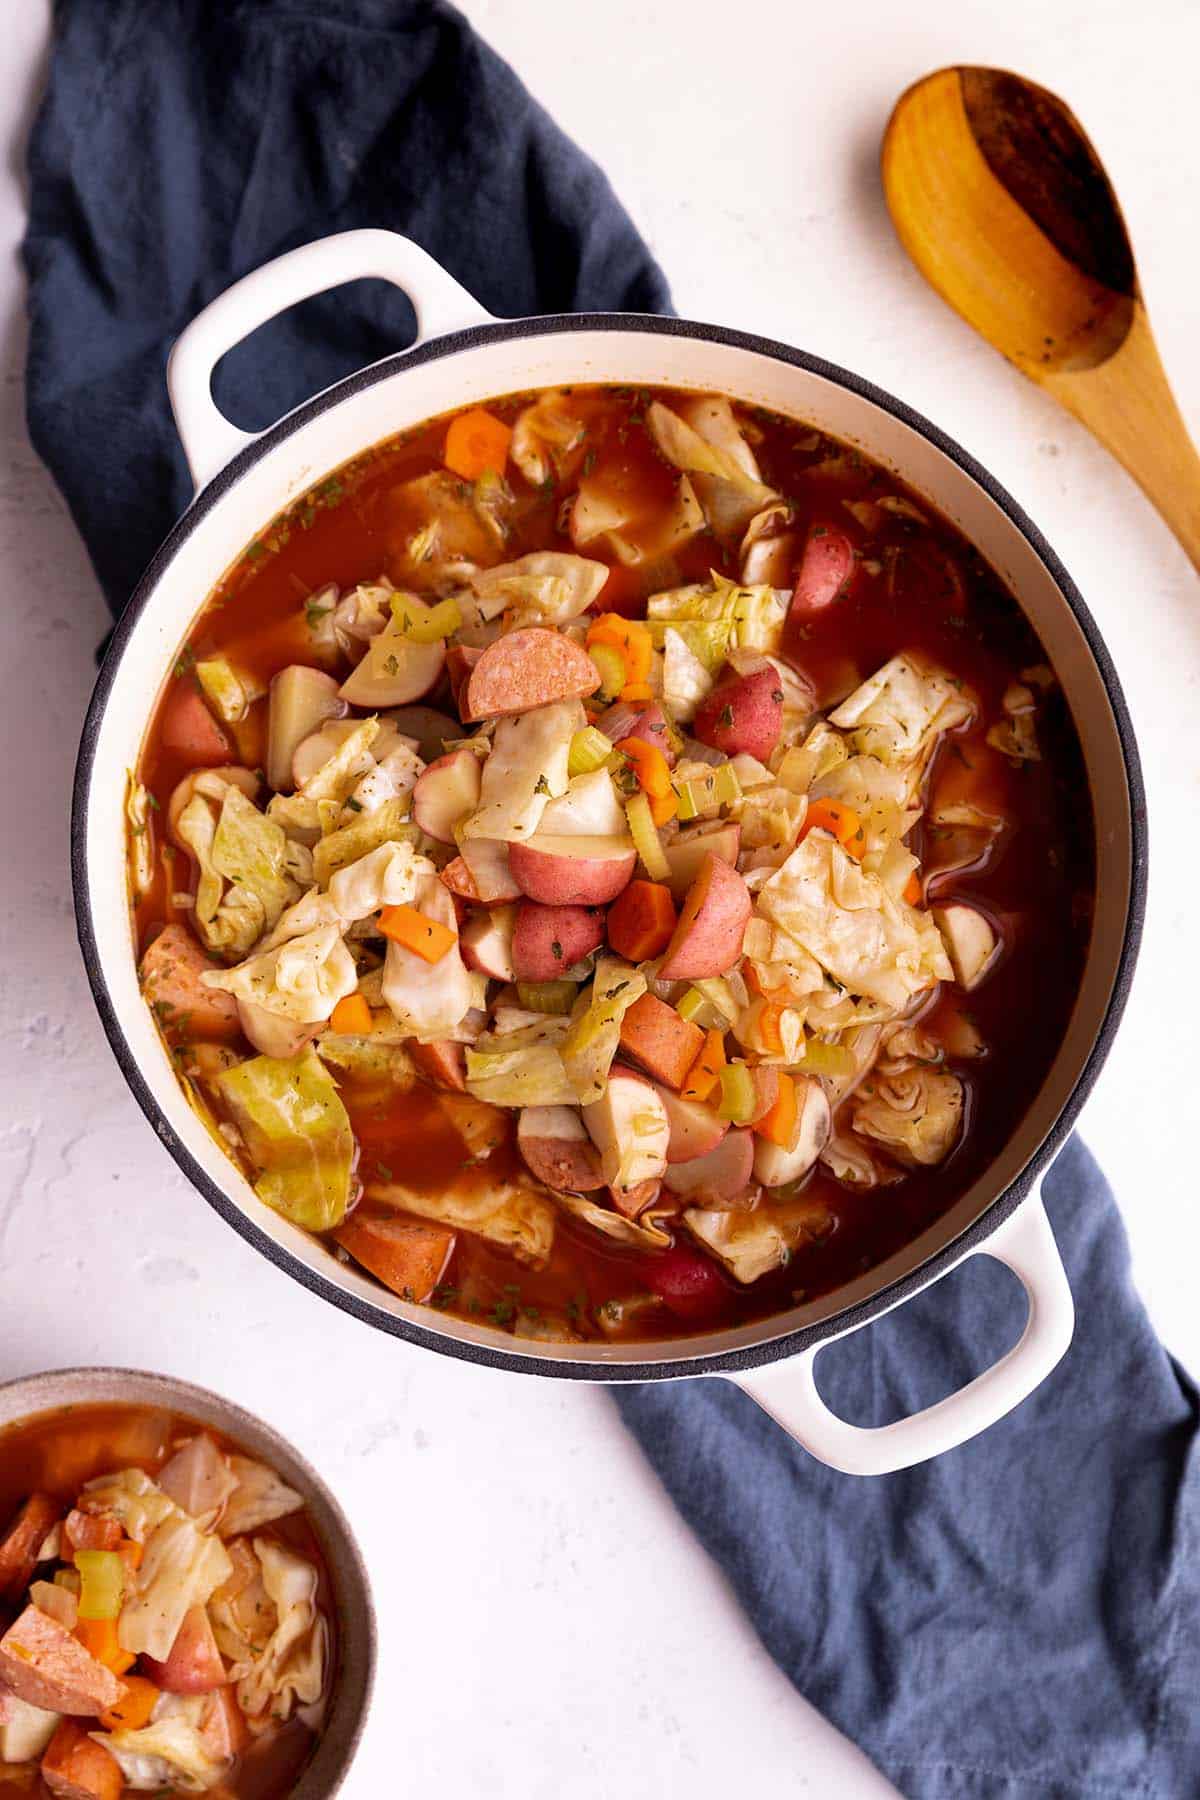 A white dutch oven with a potato, cabbage and sausage soup.